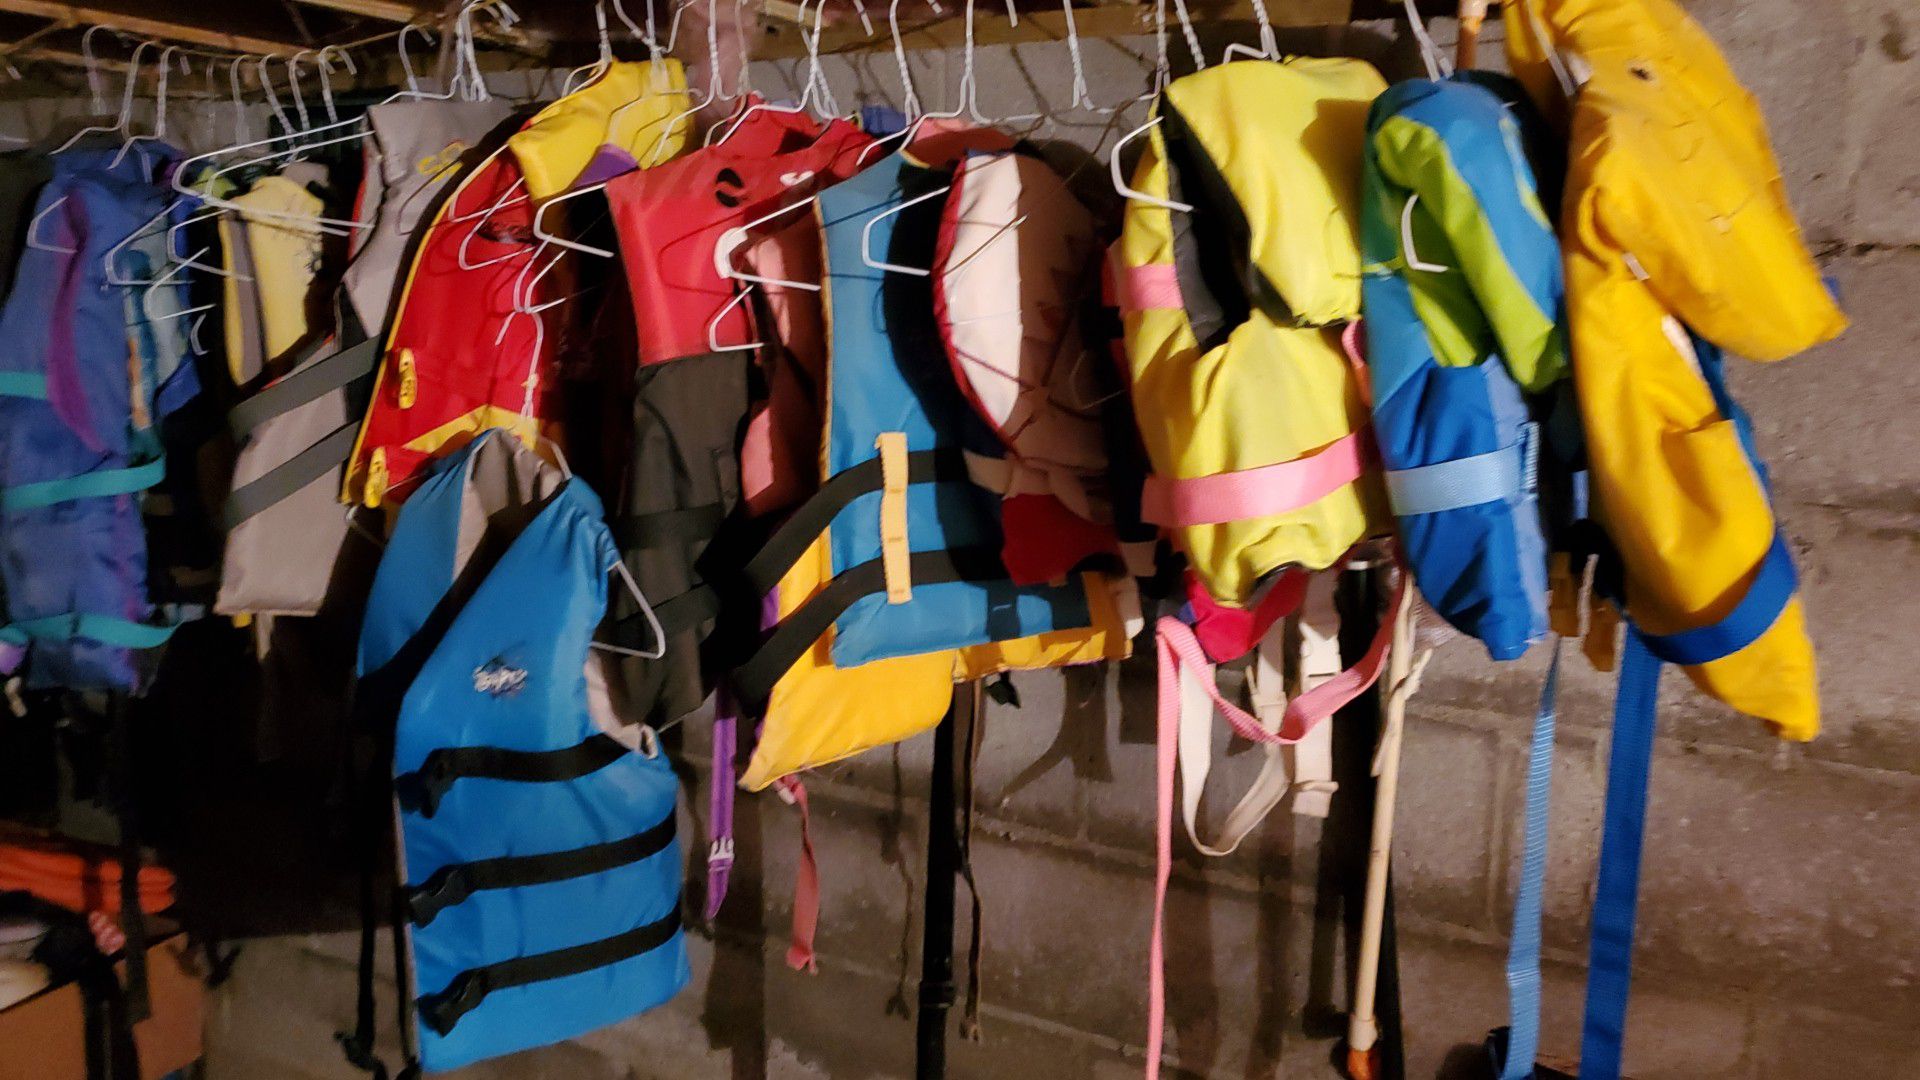 Boating supplies. Over 50 lifejackets for sale. Babies to adults. Also all kinds of boating supplies. Throw cushions. Anchors rooes bumper buoys .